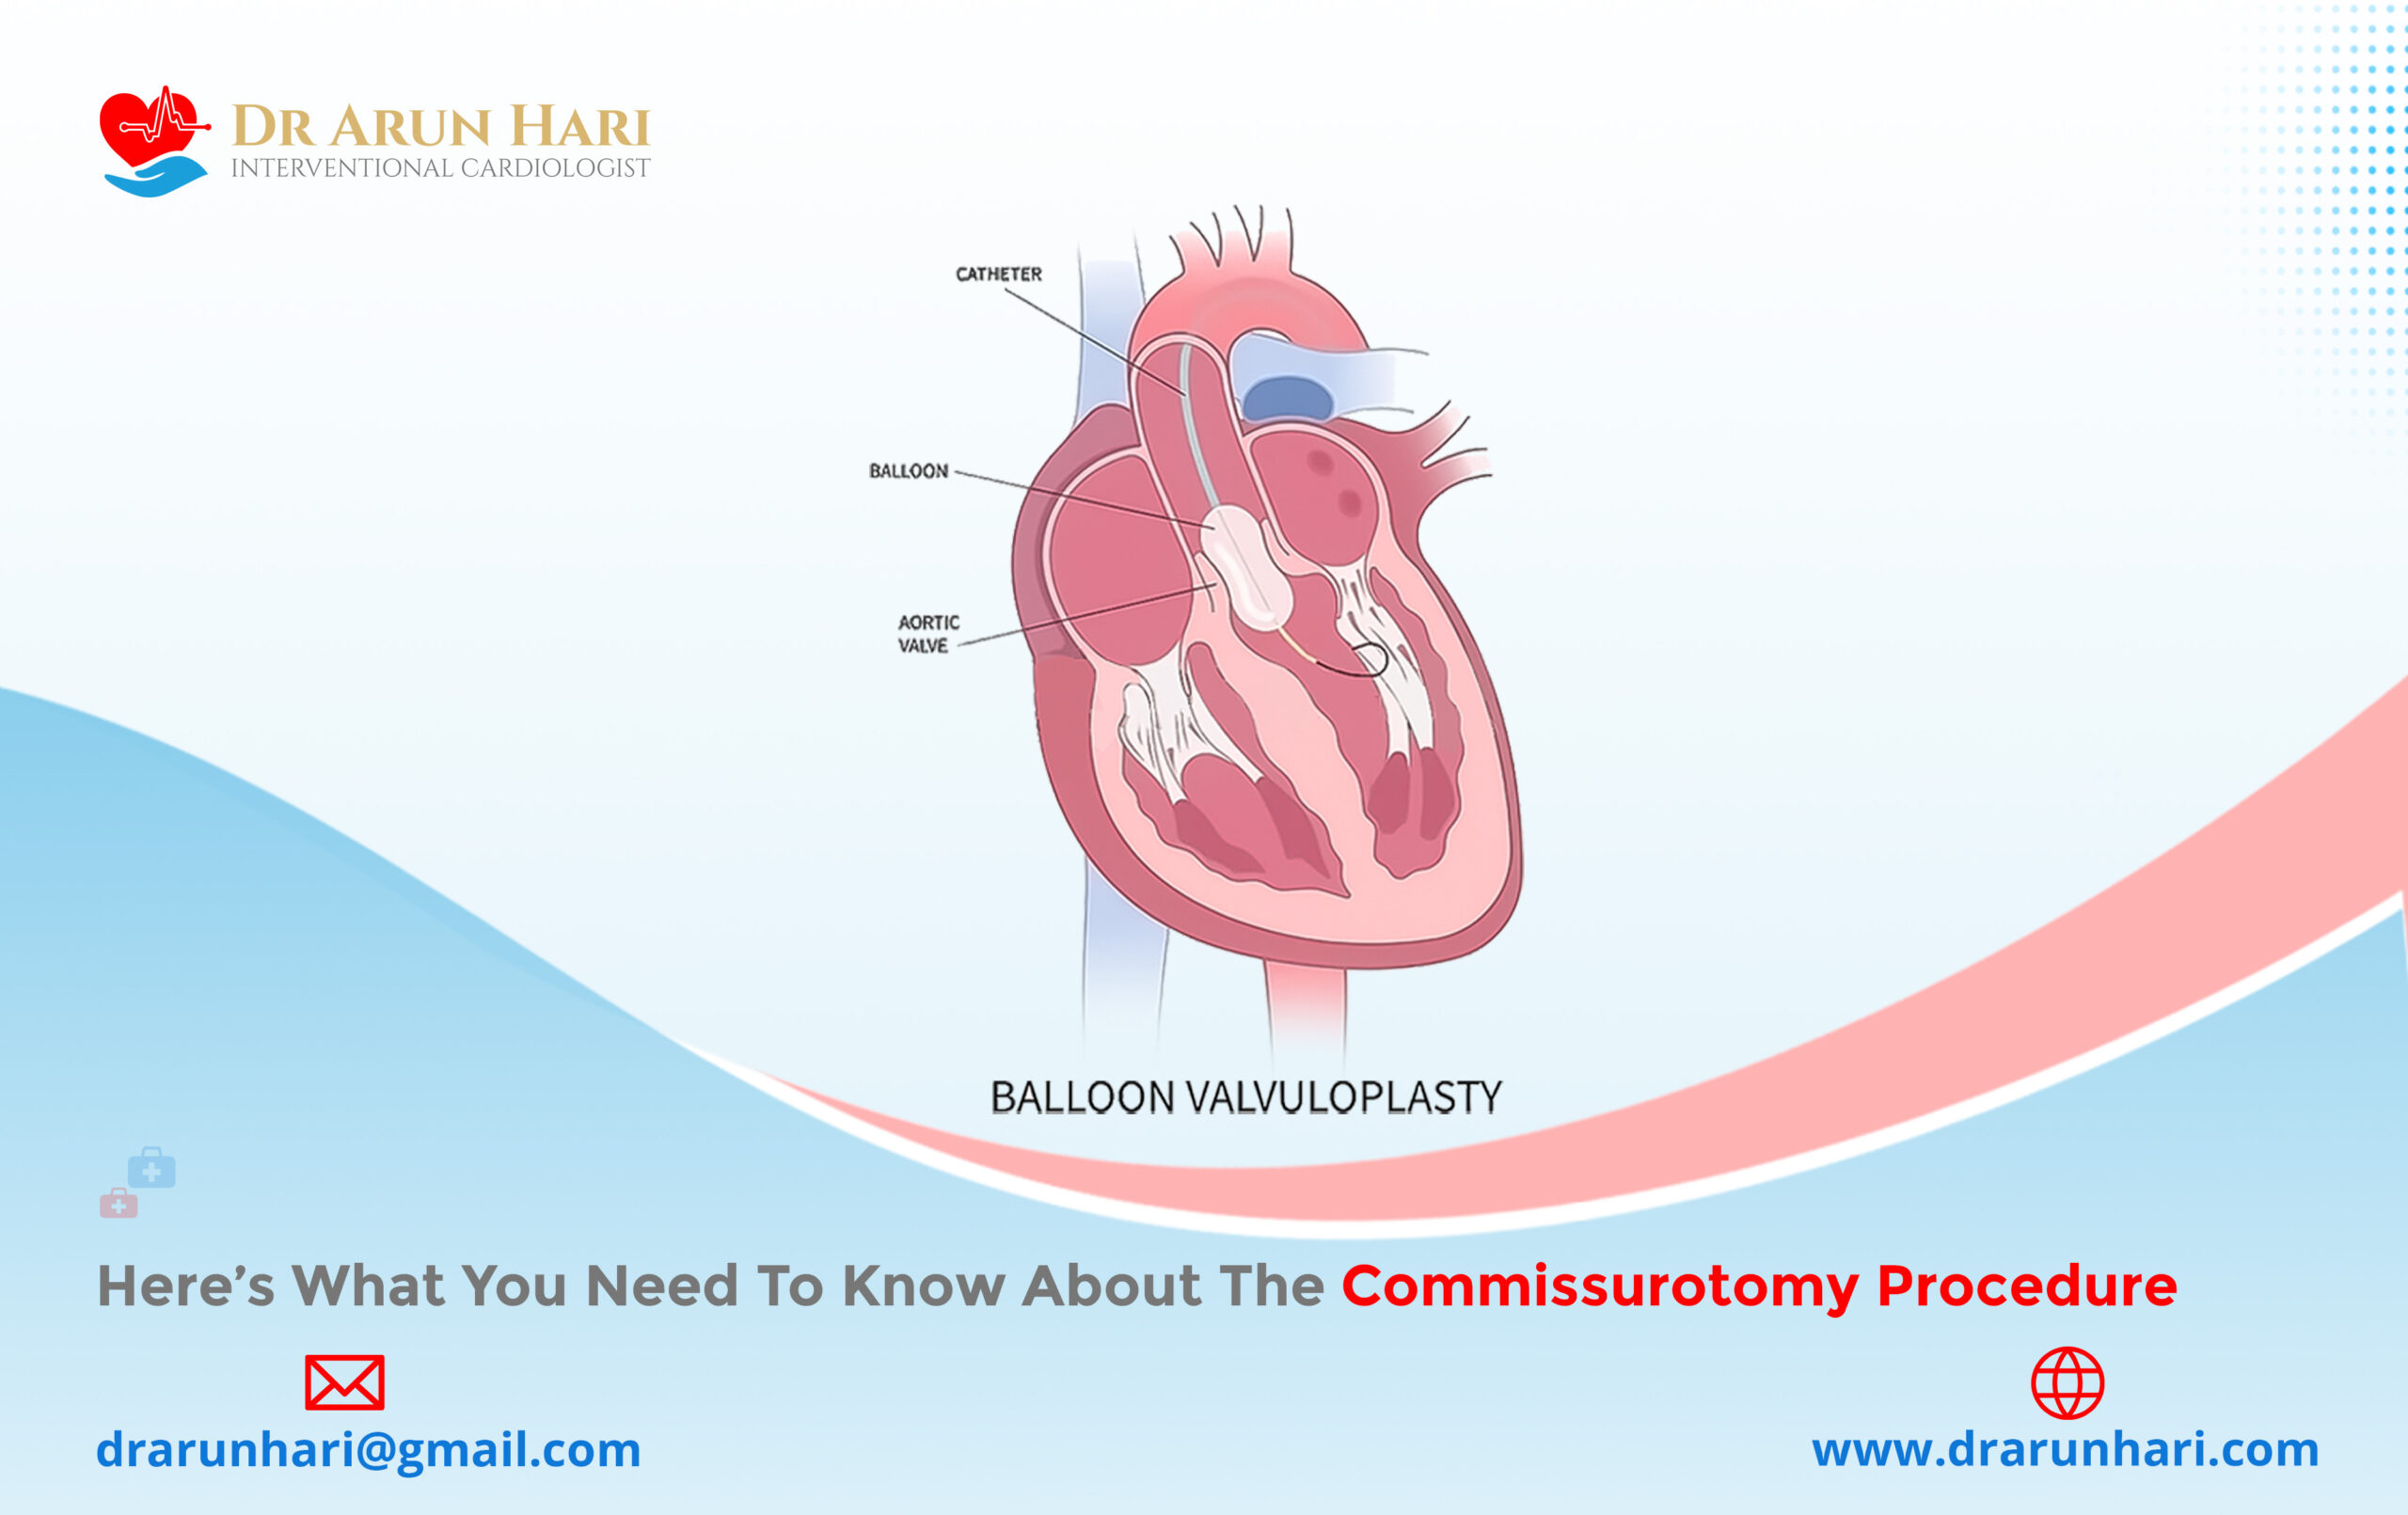 Here’s What You Need to Know about the Commissurotomy Procedure